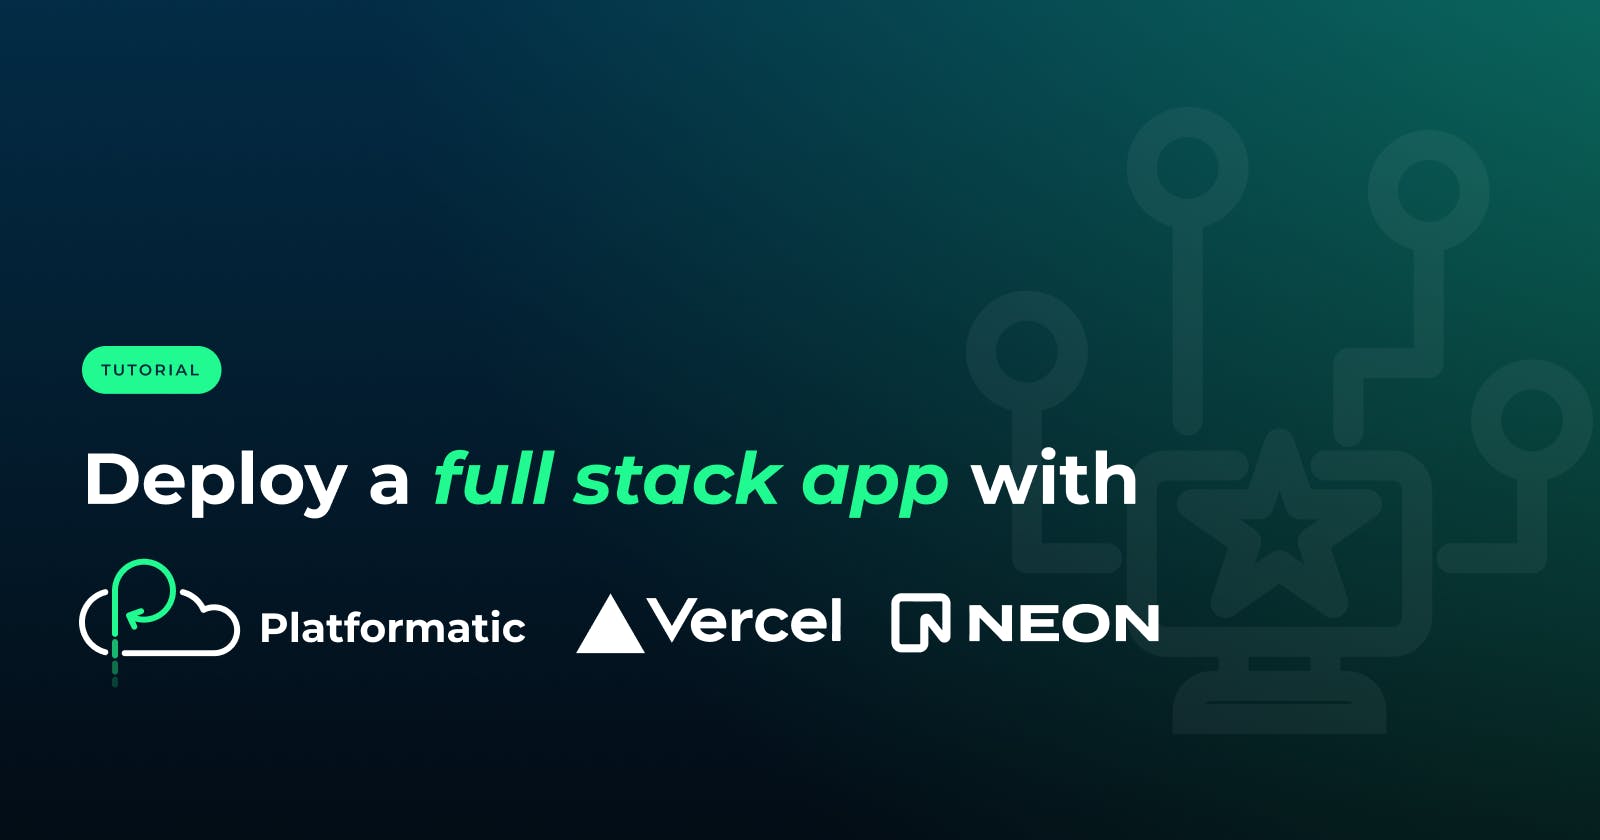 Deploy a full stack app with Platformatic, Vercel and Neon